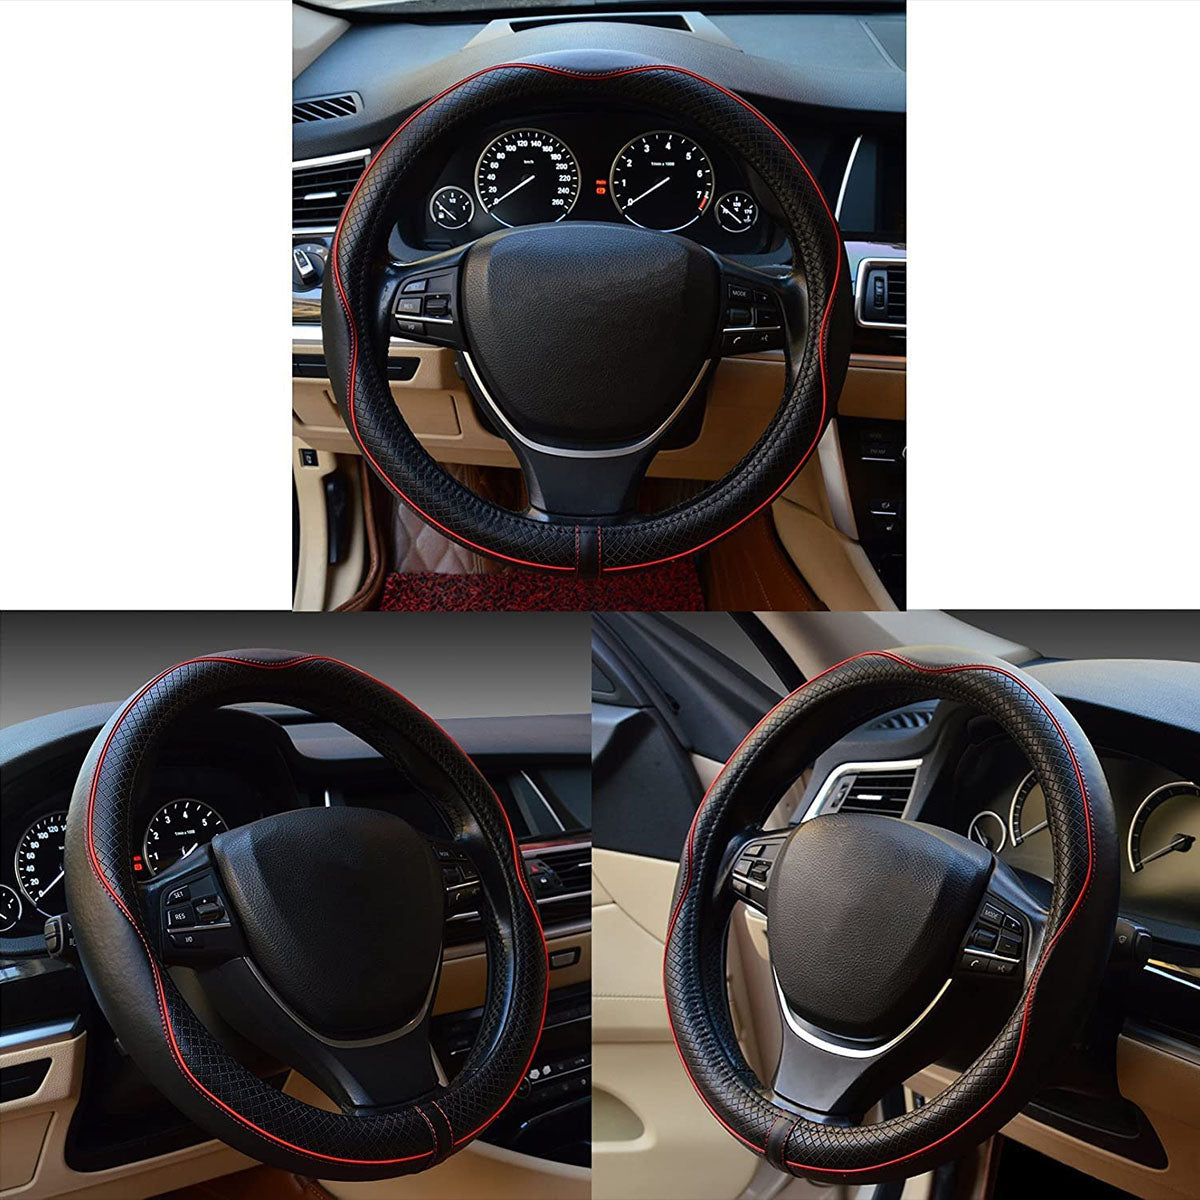 Car Steering Wheel Cover, Custom For Your Cars, Anti-Slip, Safety, Soft, Breathable, Heavy Duty, Thick, Full Surround, Sports Style, Car Accessories UE18990